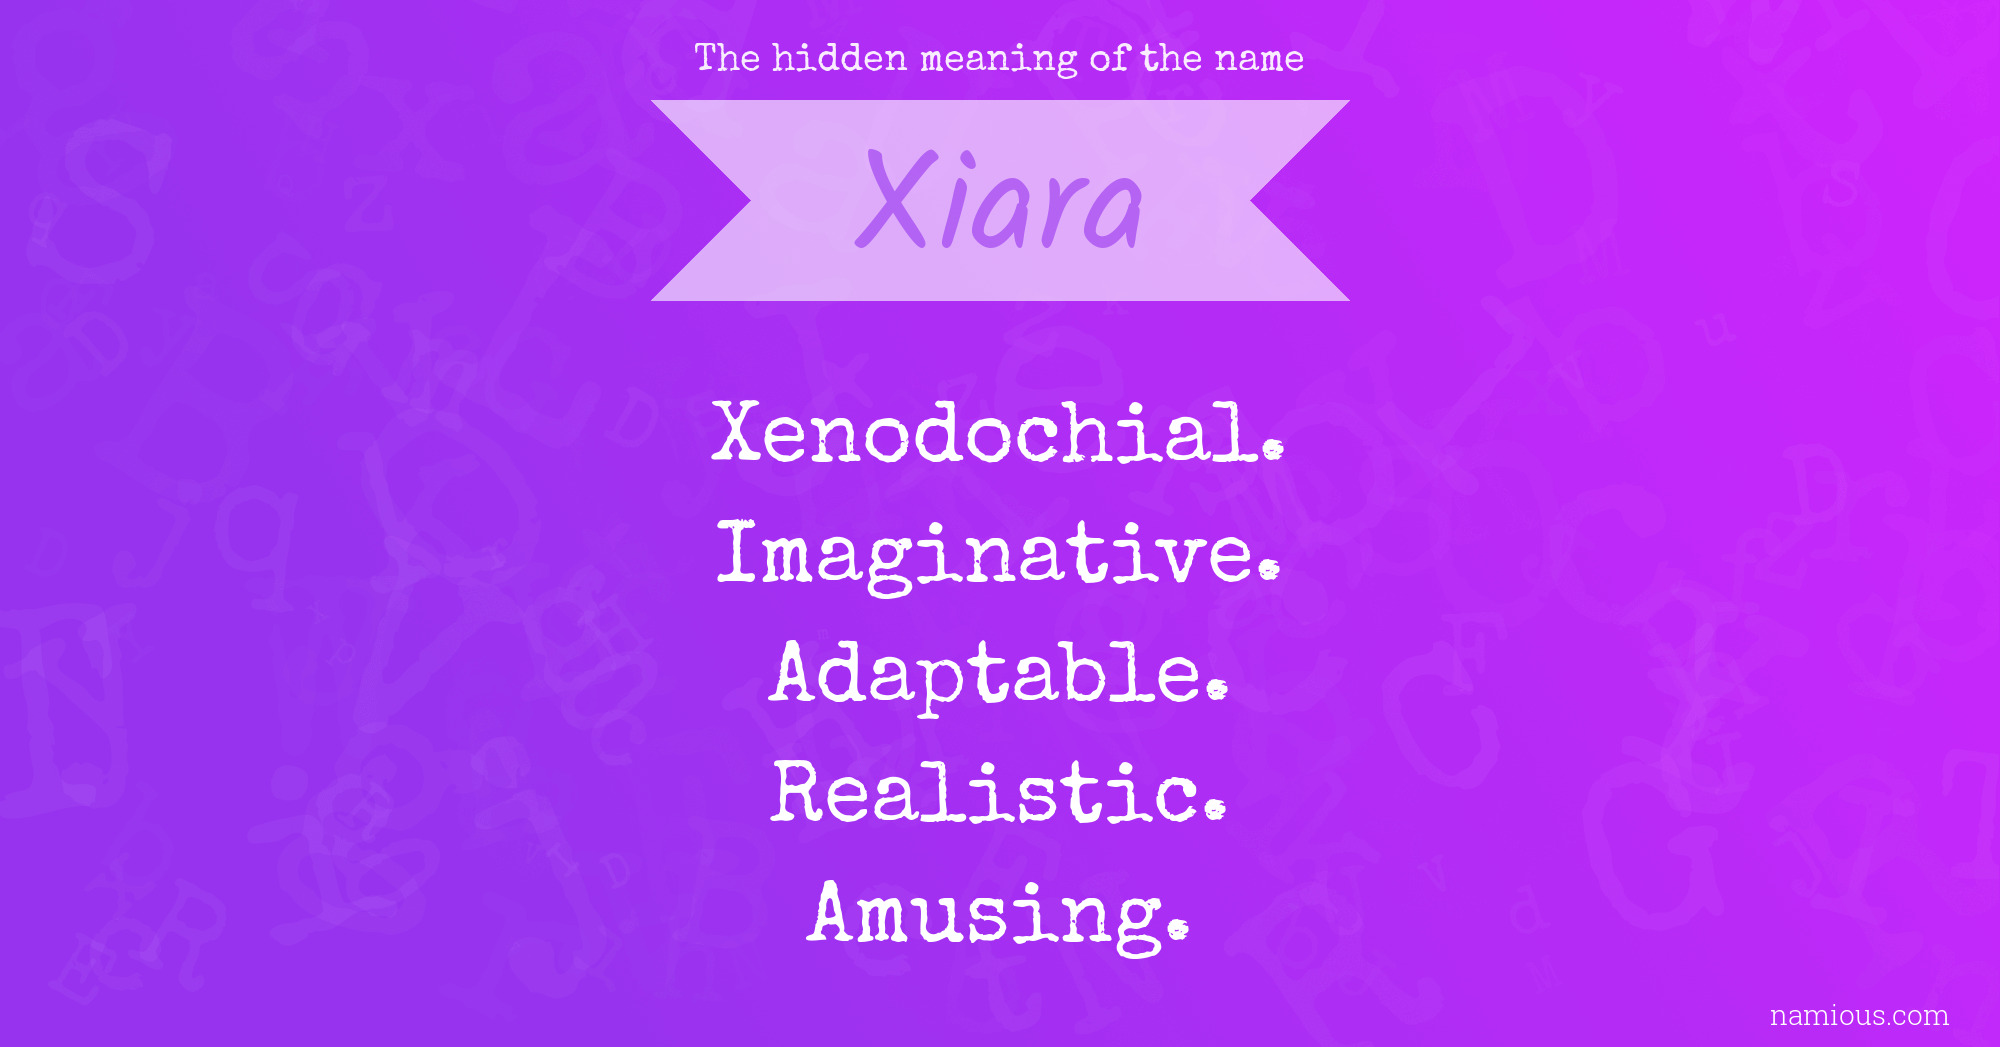 The hidden meaning of the name Xiara